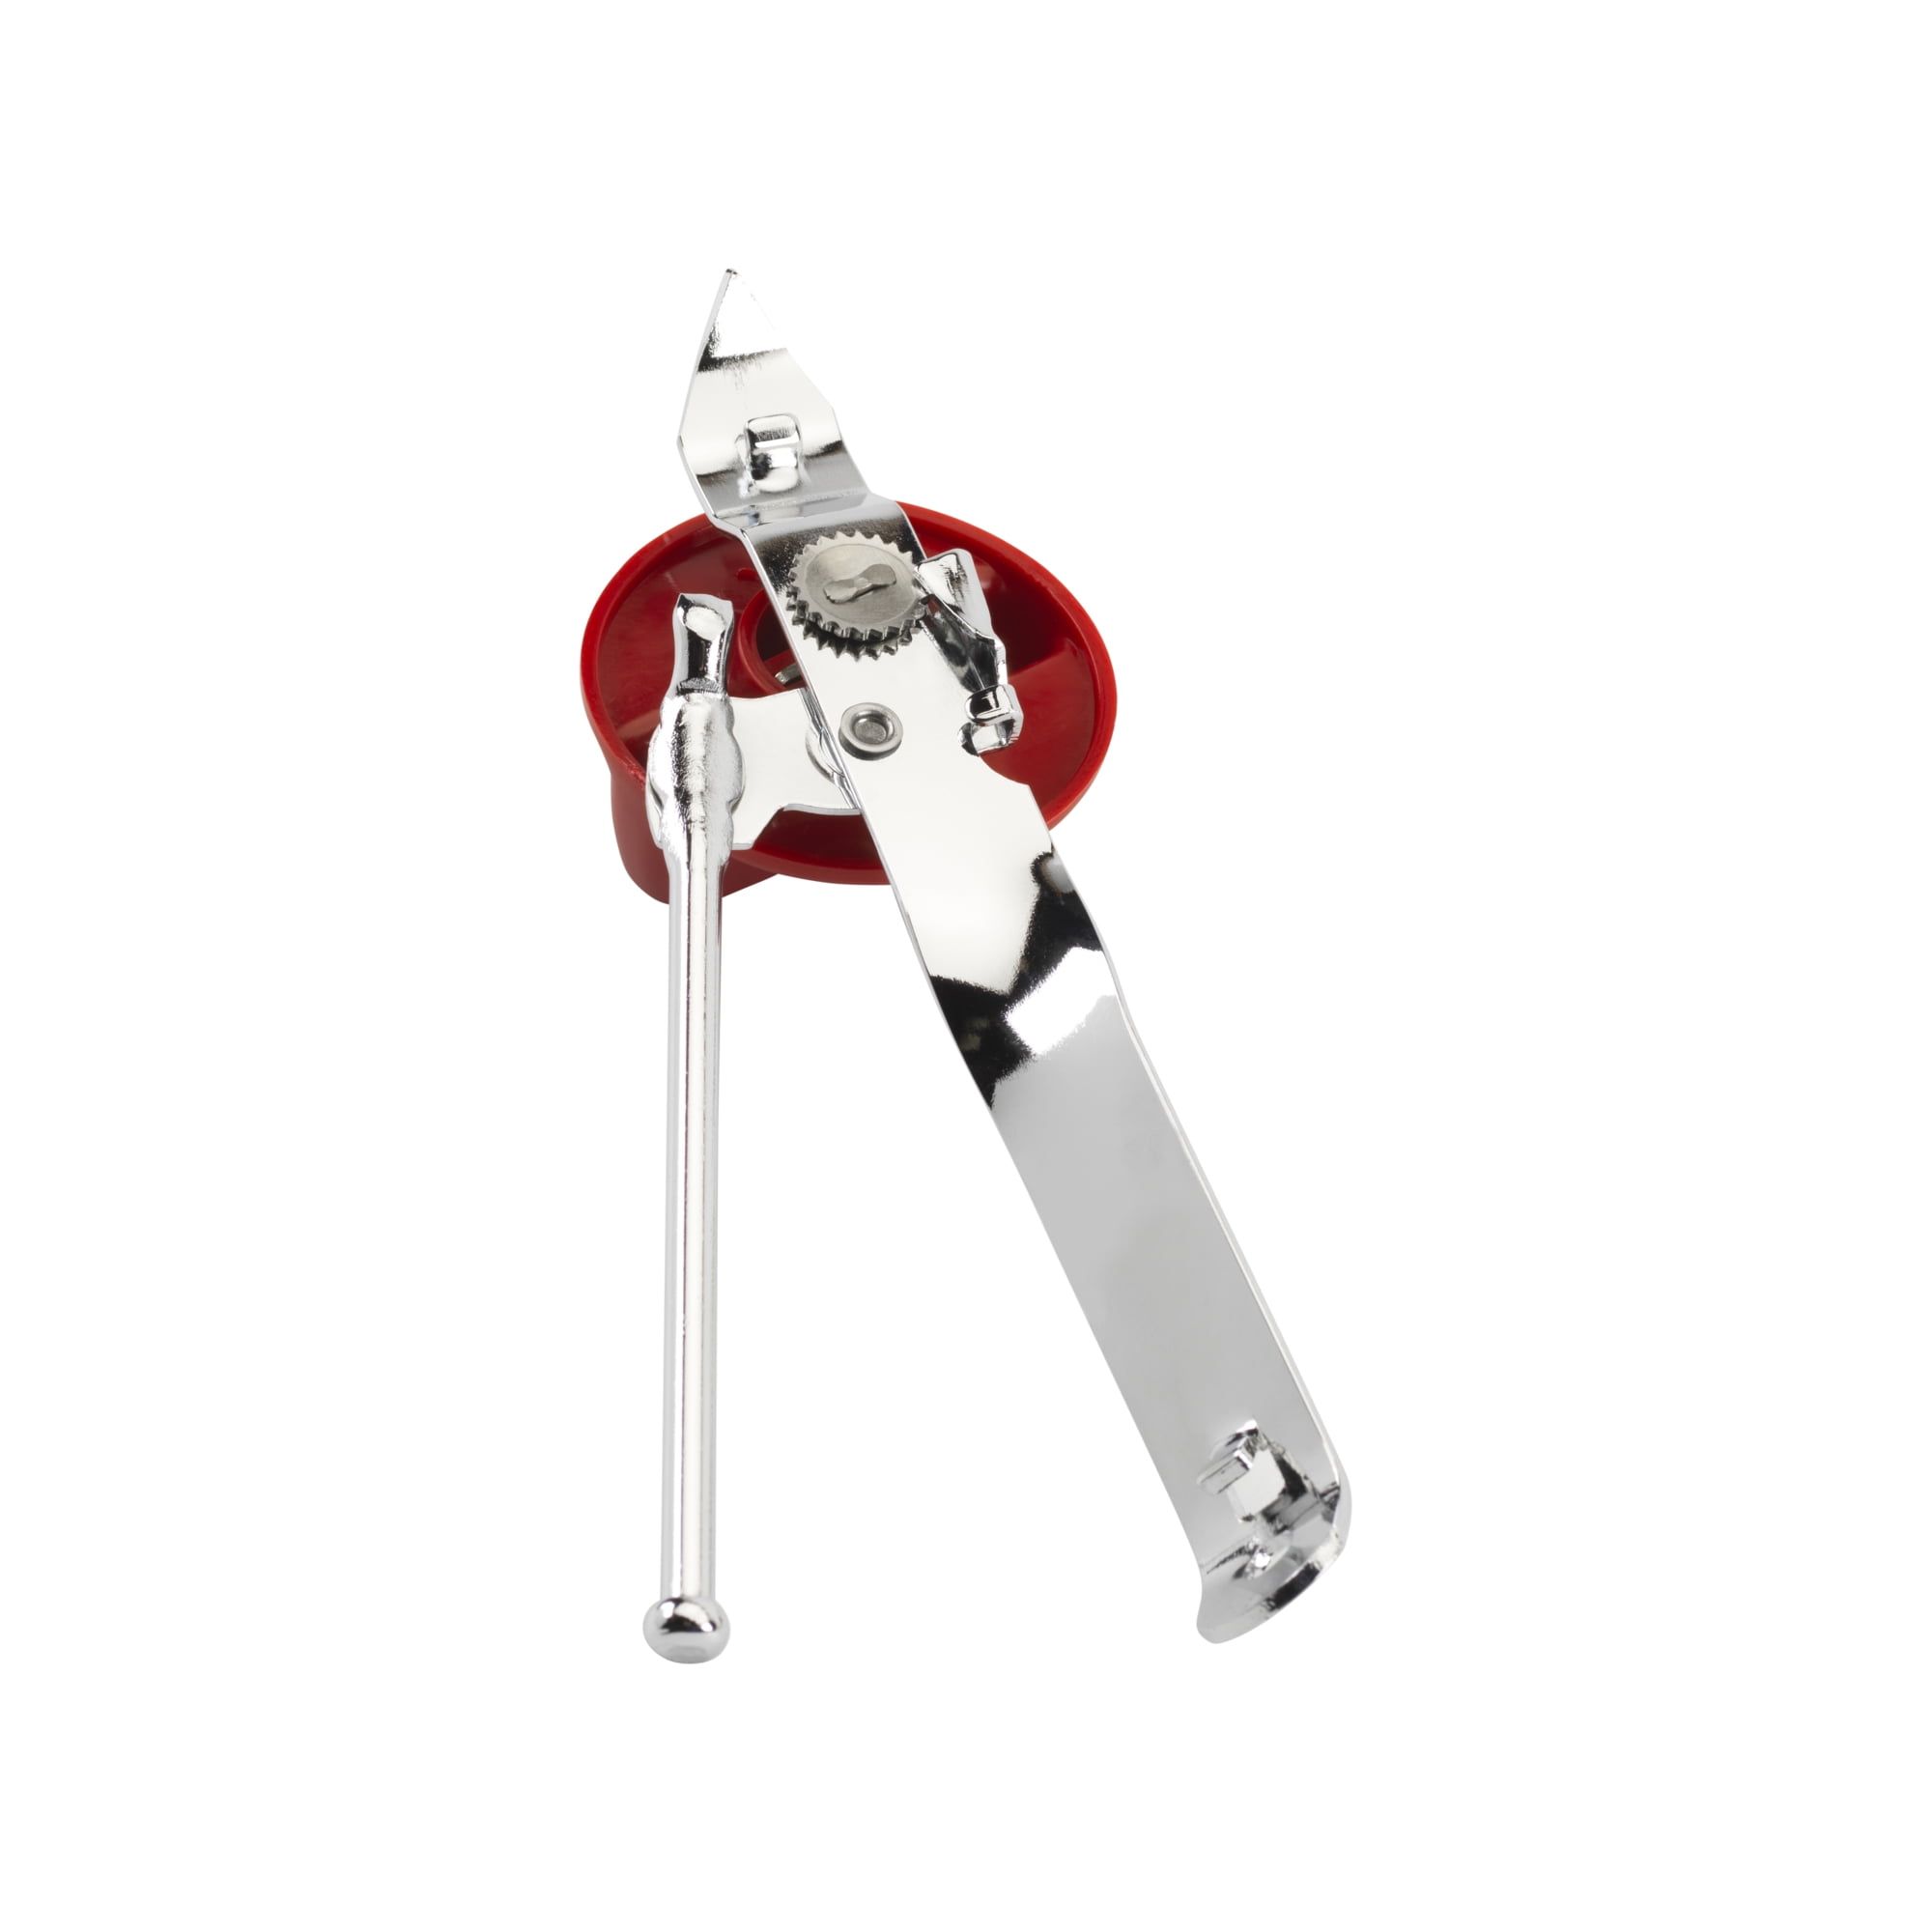 Grand Openings 3-in-1 Can Opener, CO1200